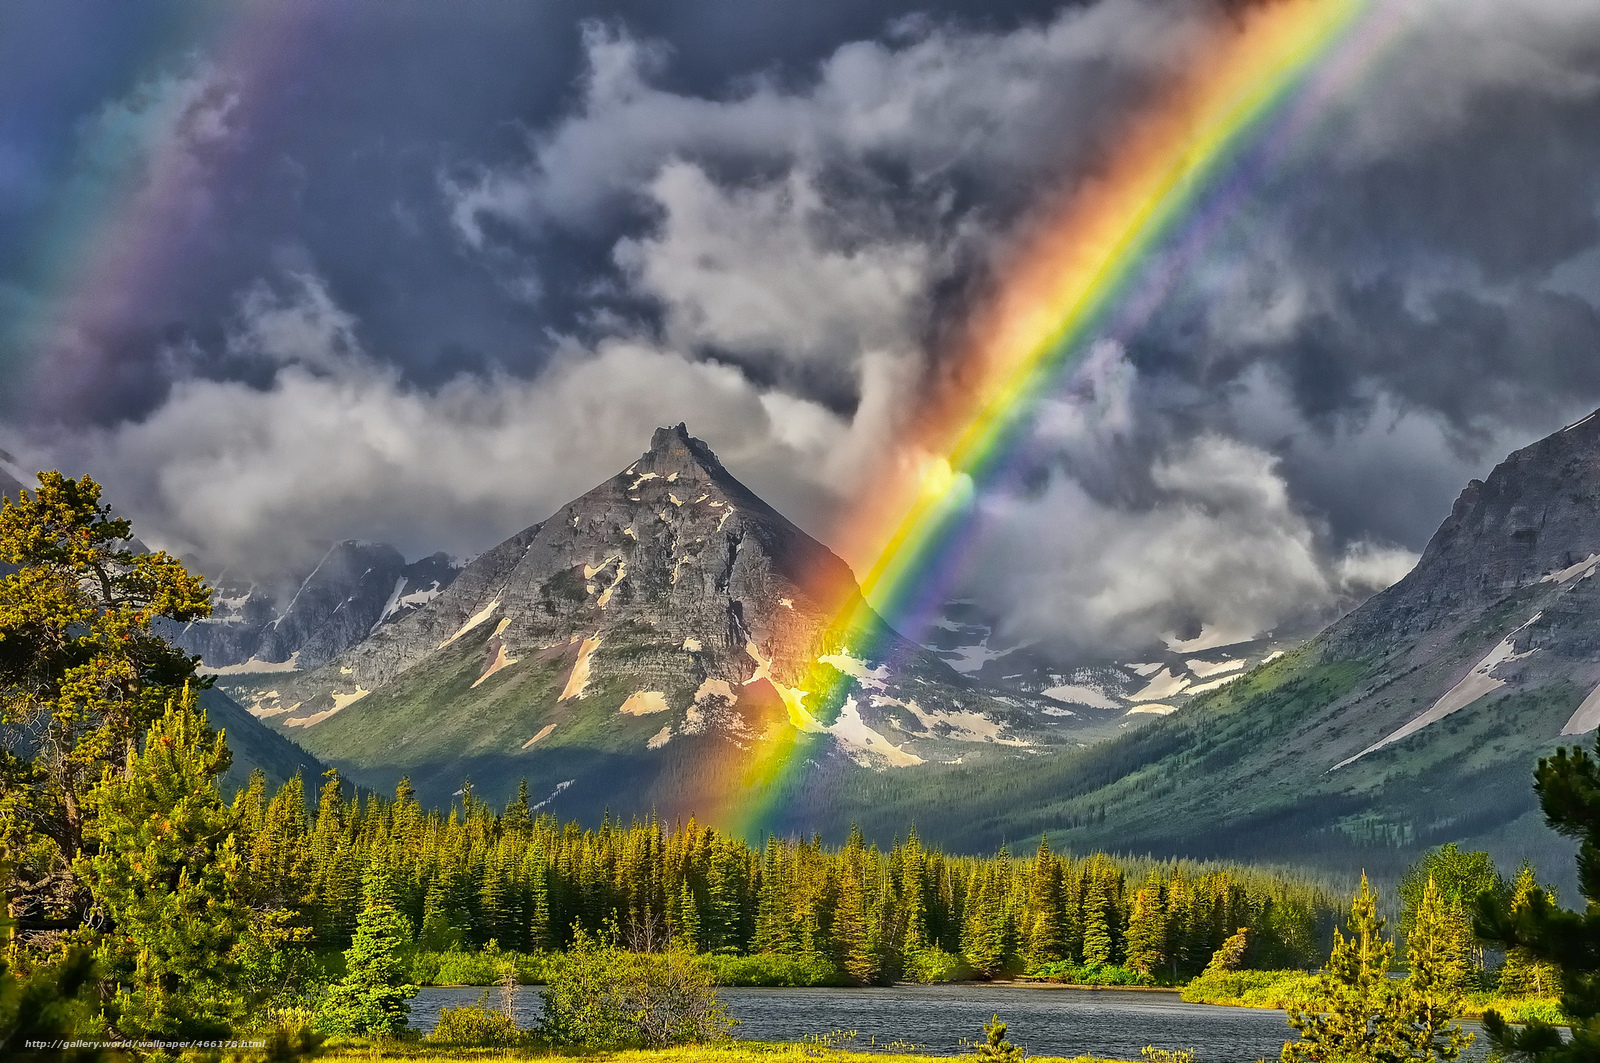 Download Wallpaper Painted Teepee Peak, Mountains, - Mountain And Rainbows - HD Wallpaper 